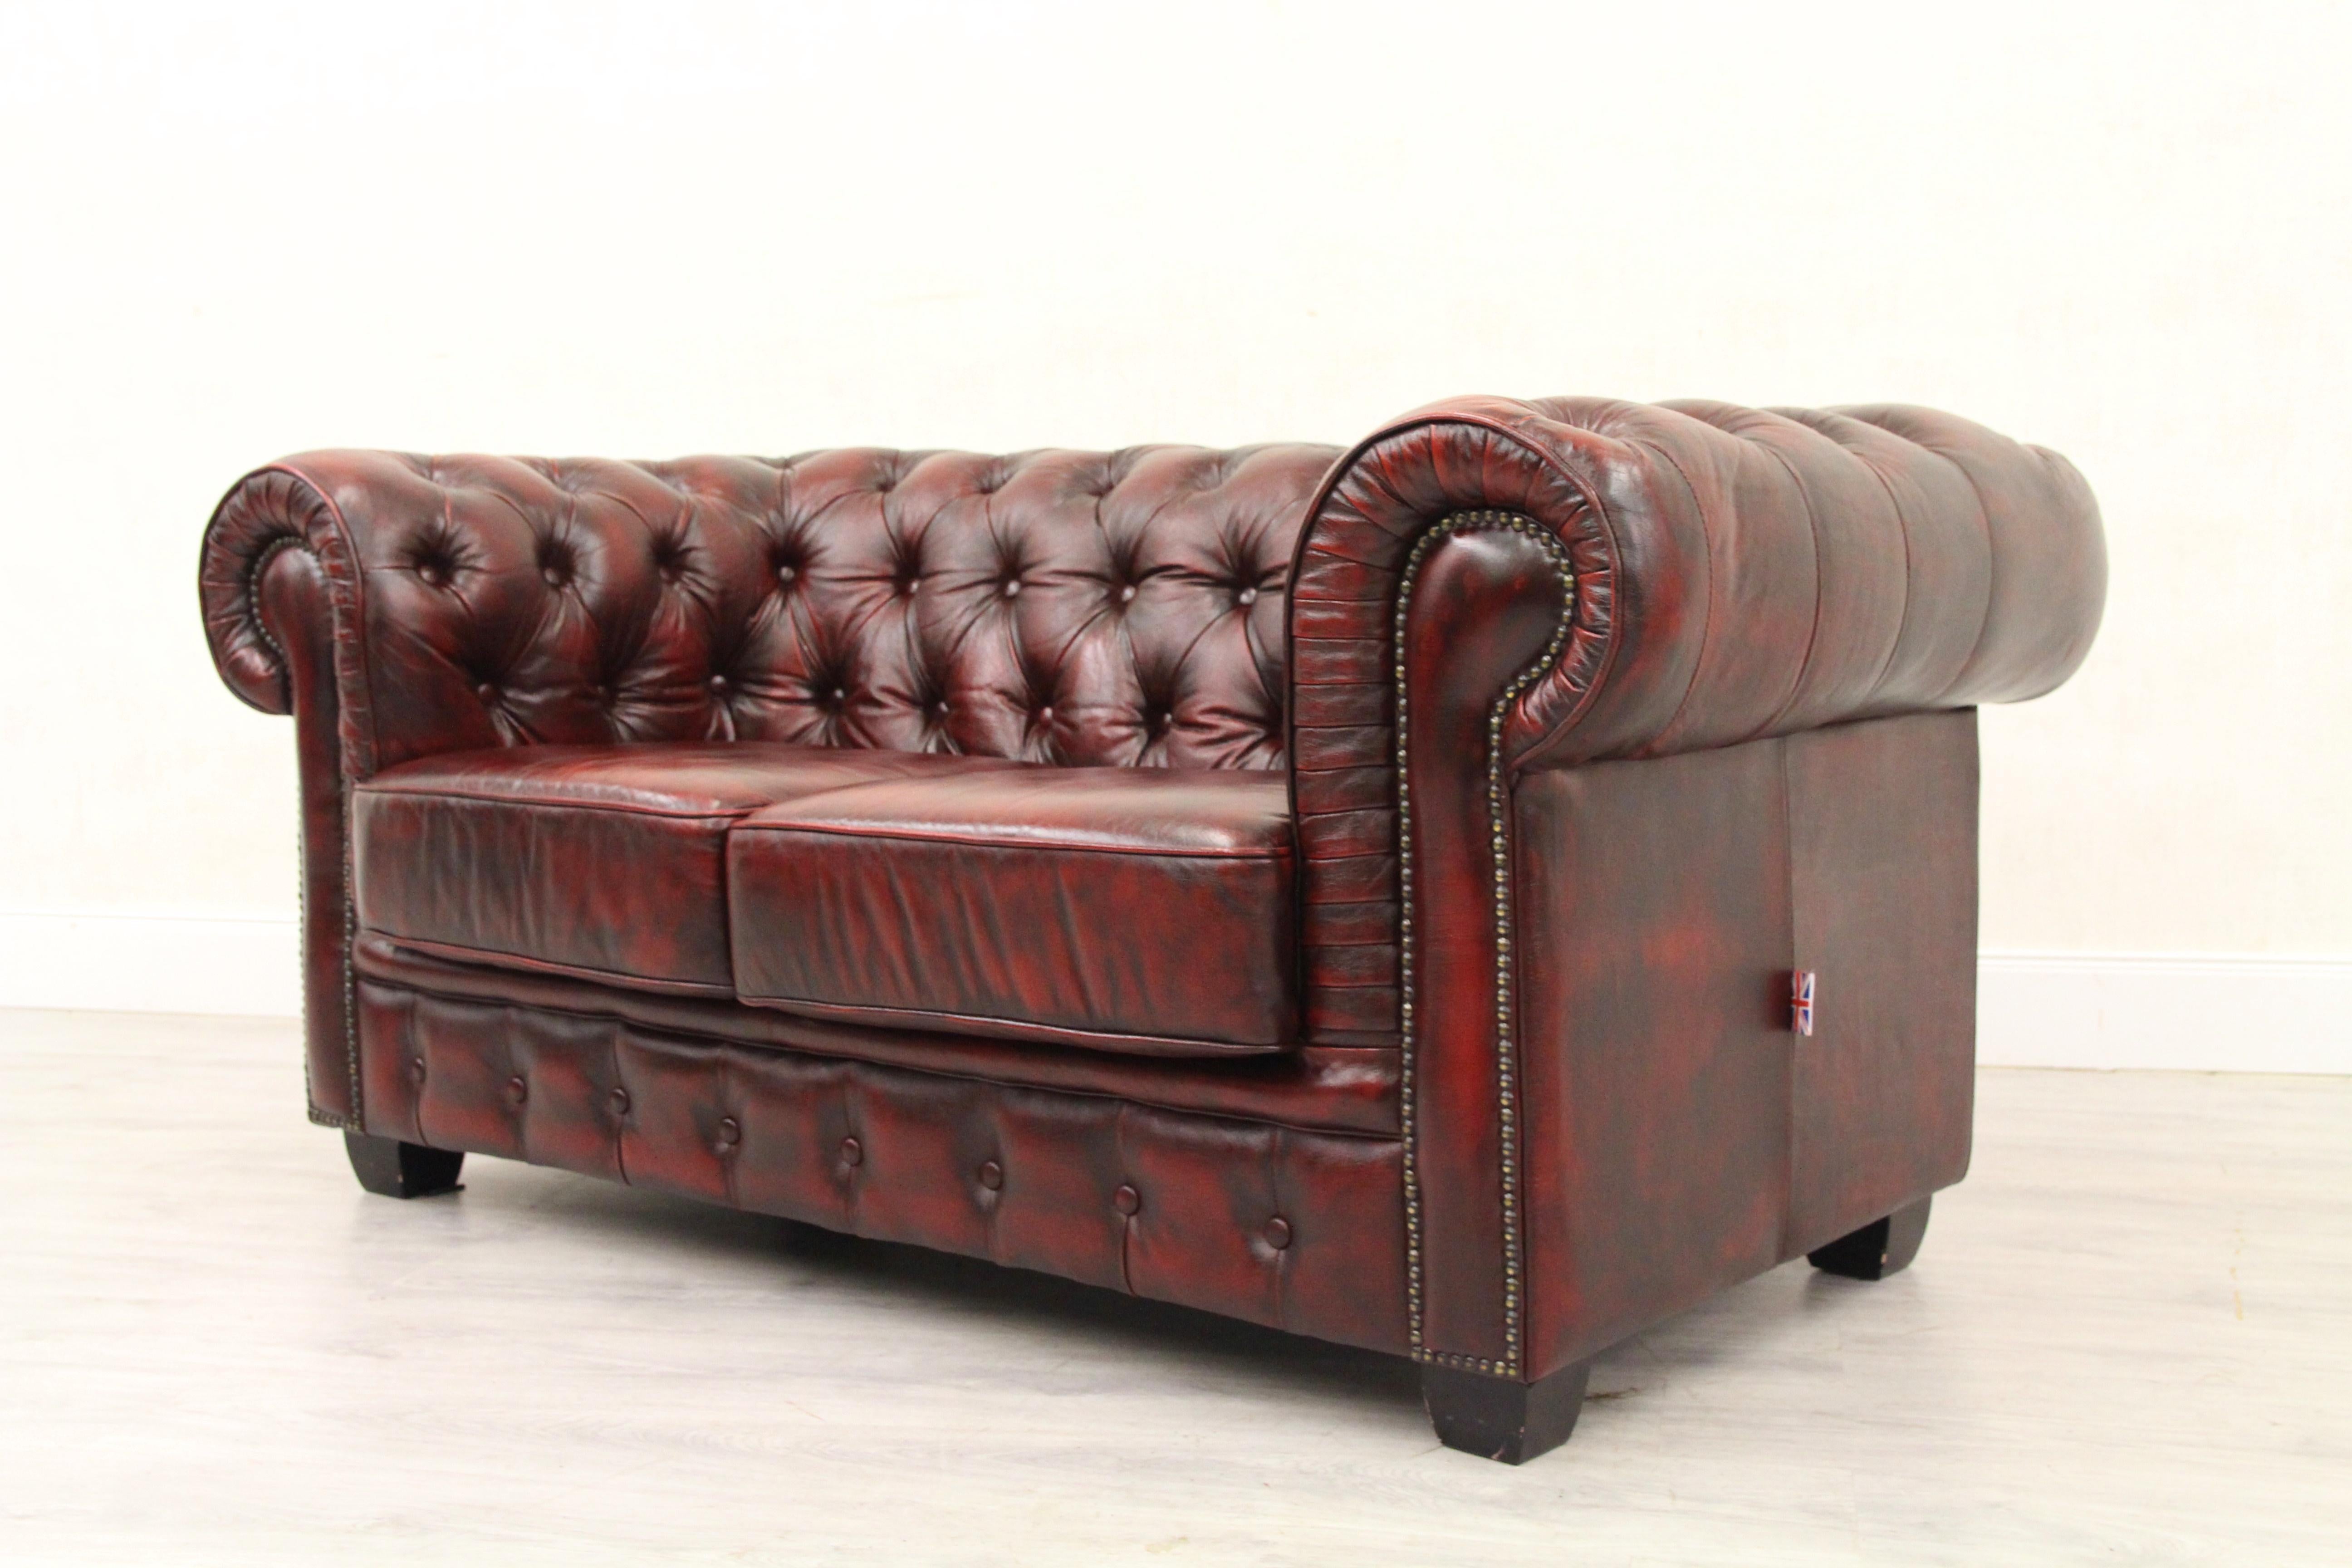 Chesterfield English Sofa Leather Antique Vintage Couch Chippendale im Angebot 2